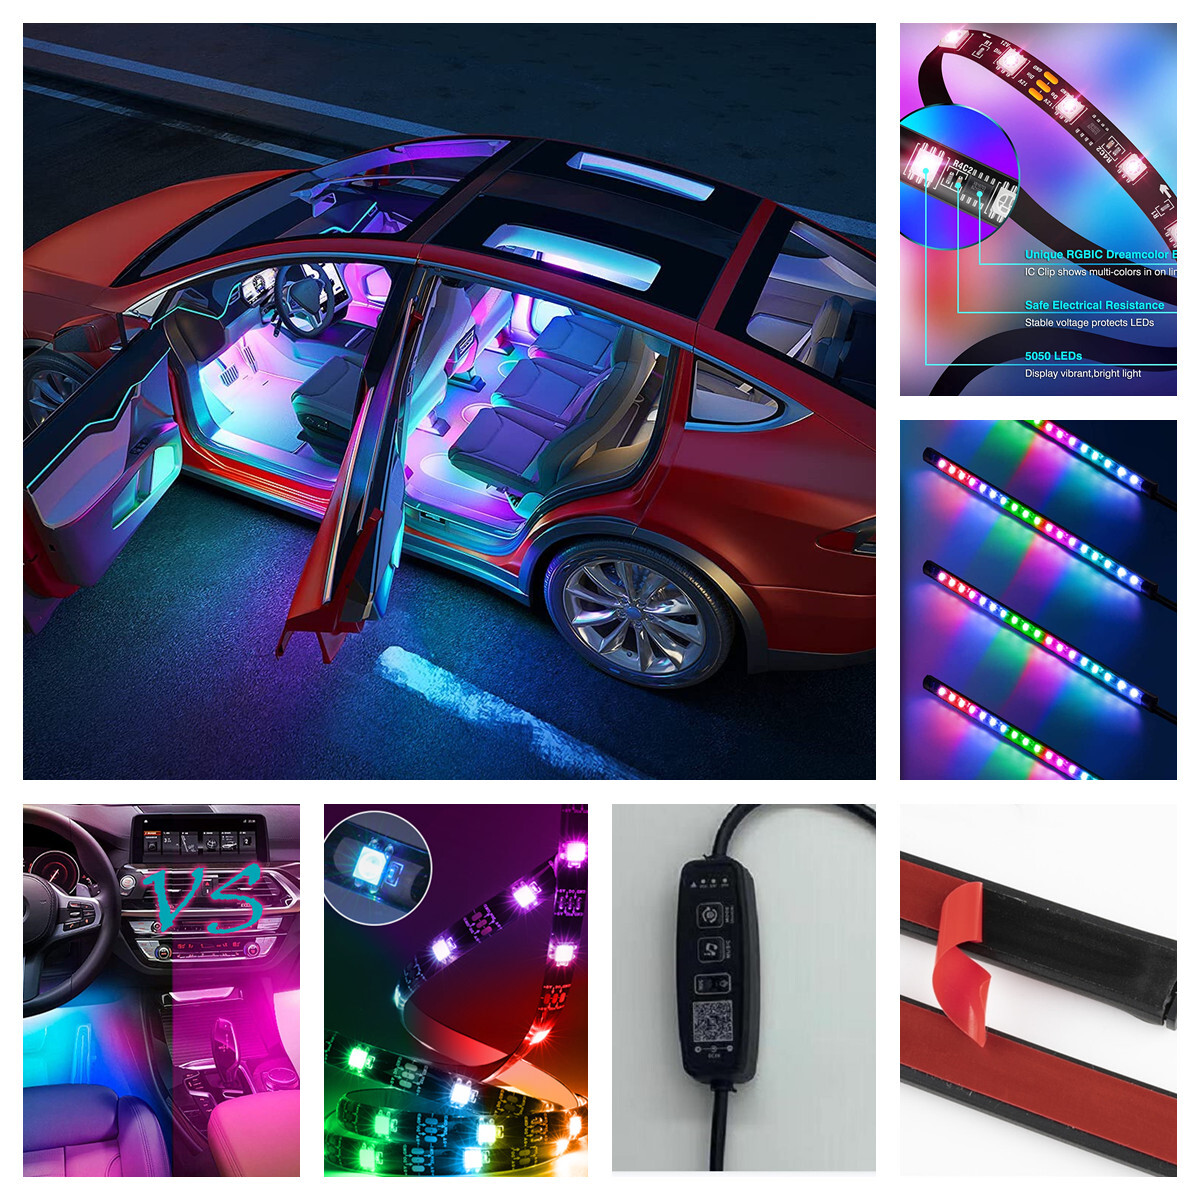 RGBIC Car LED Lights,Smart Lights strip,Interior Car Lights,With App Control,Music Sync Mode,DIY Mode and Multiple Scene Options RGBIC car lights,Smart Lights strip 